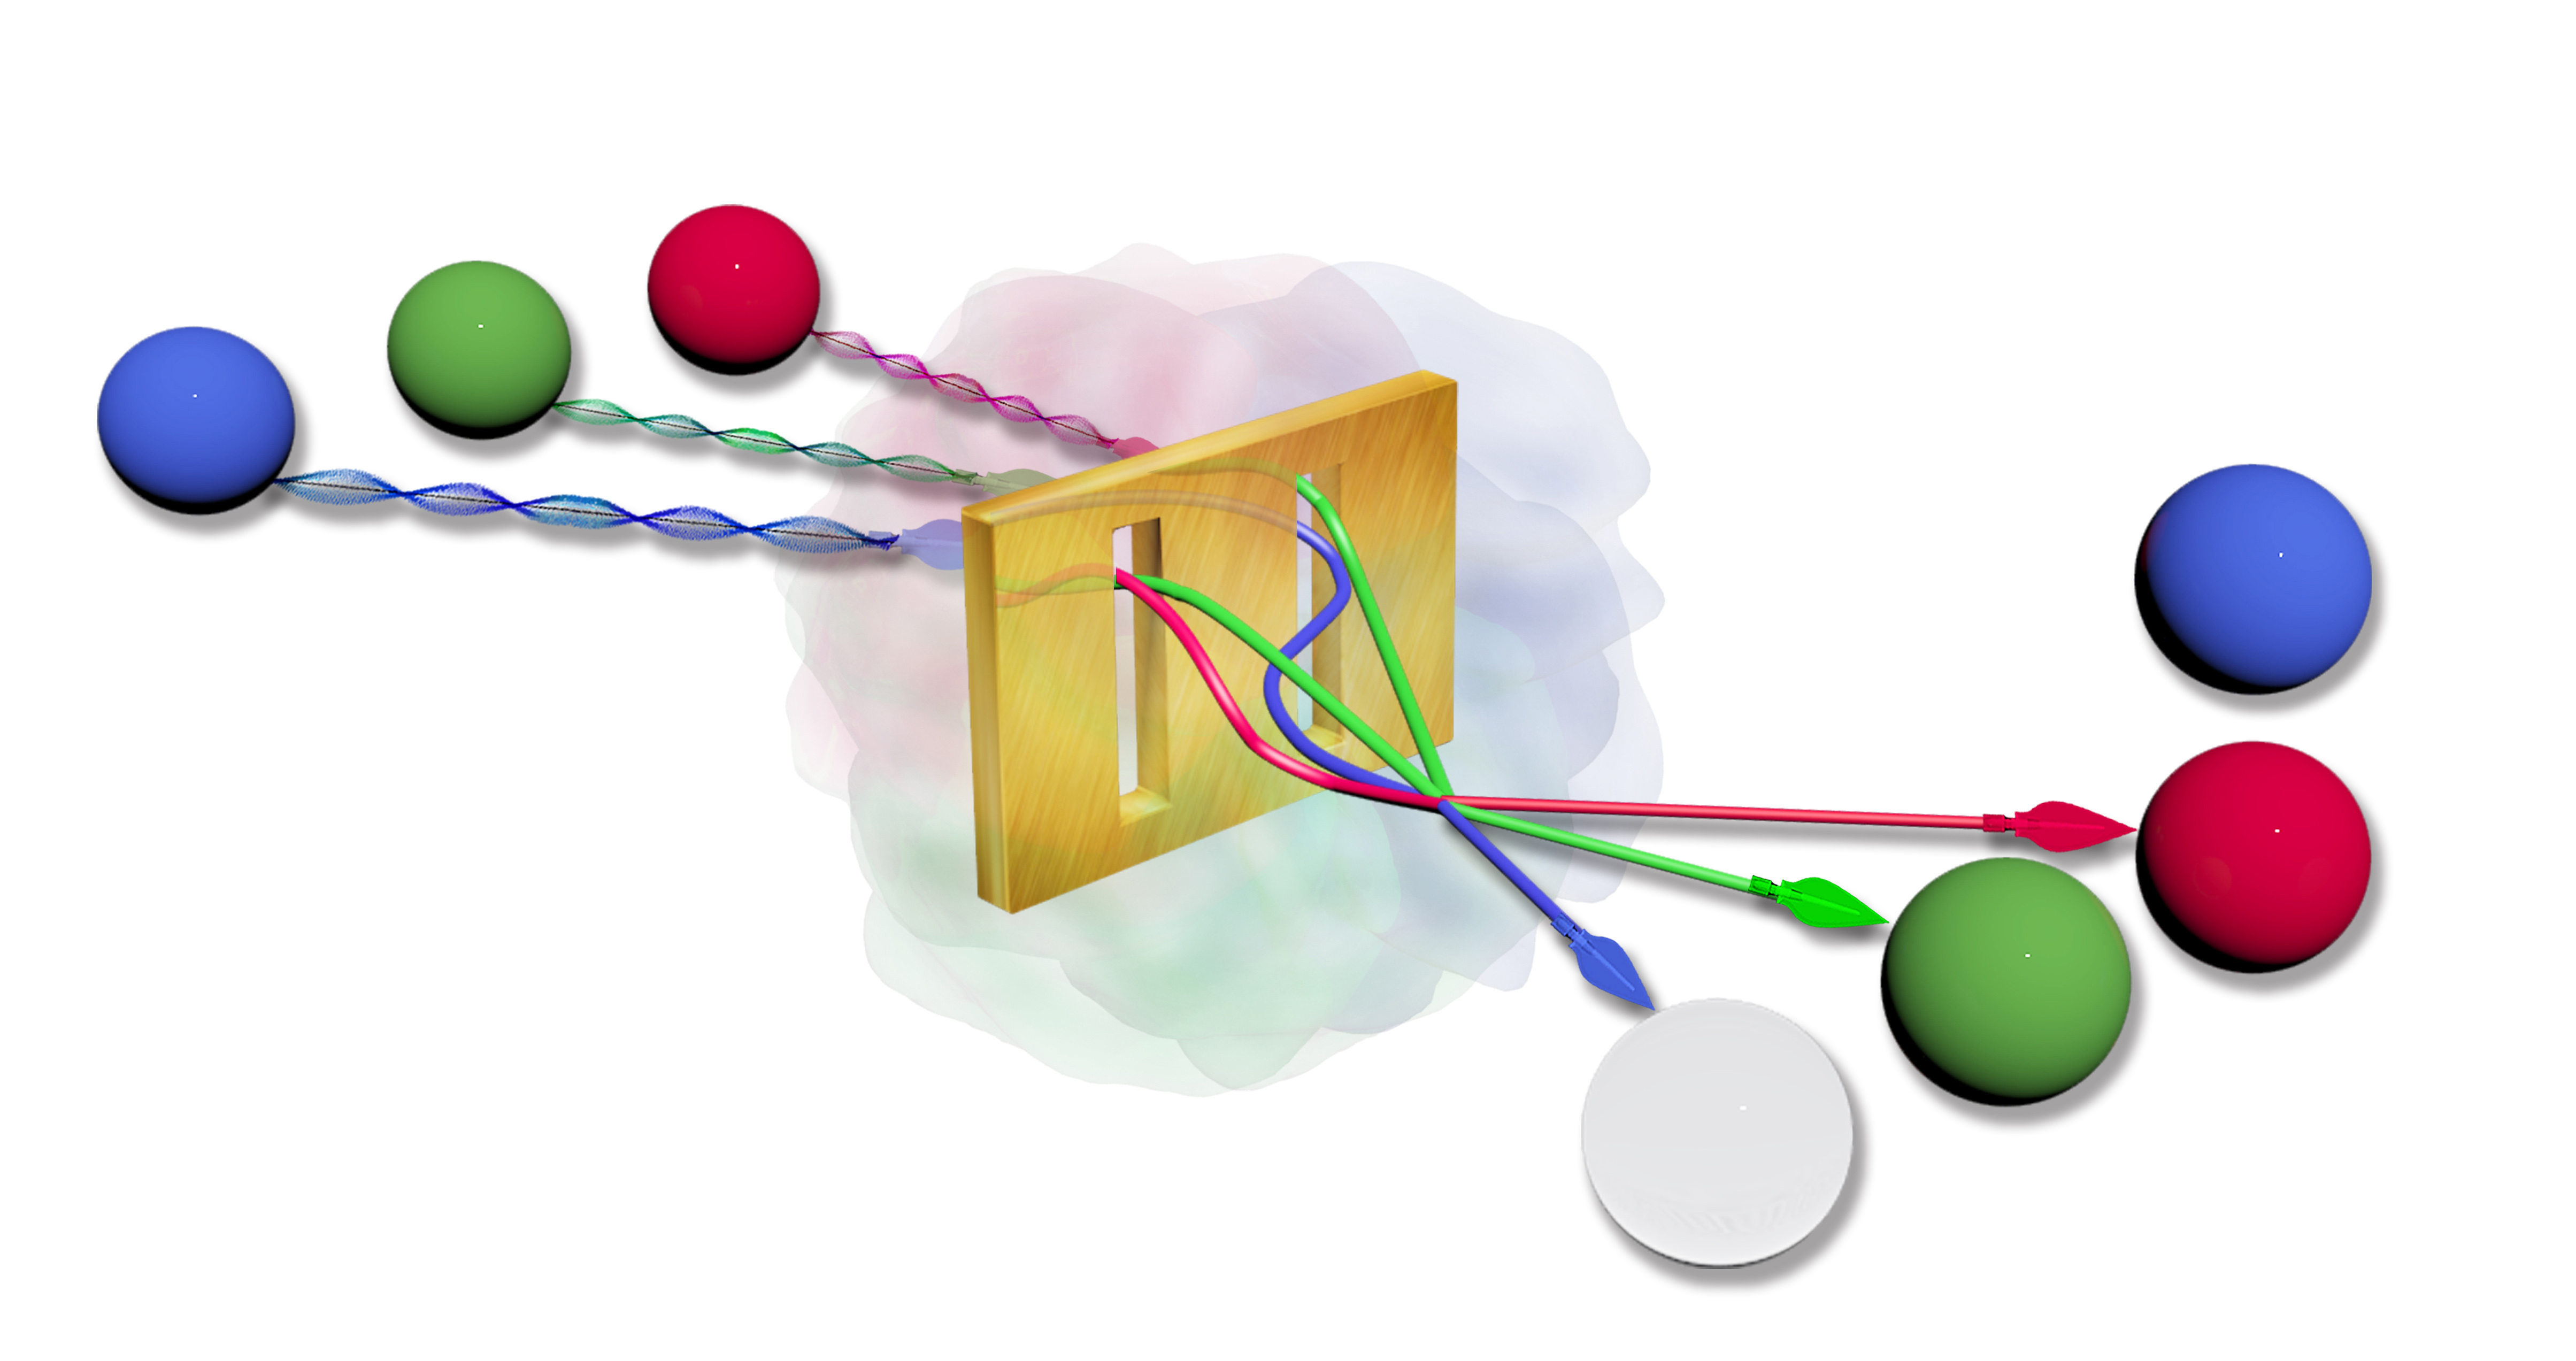 concept of multiparticle scattering mediated by optical near fields